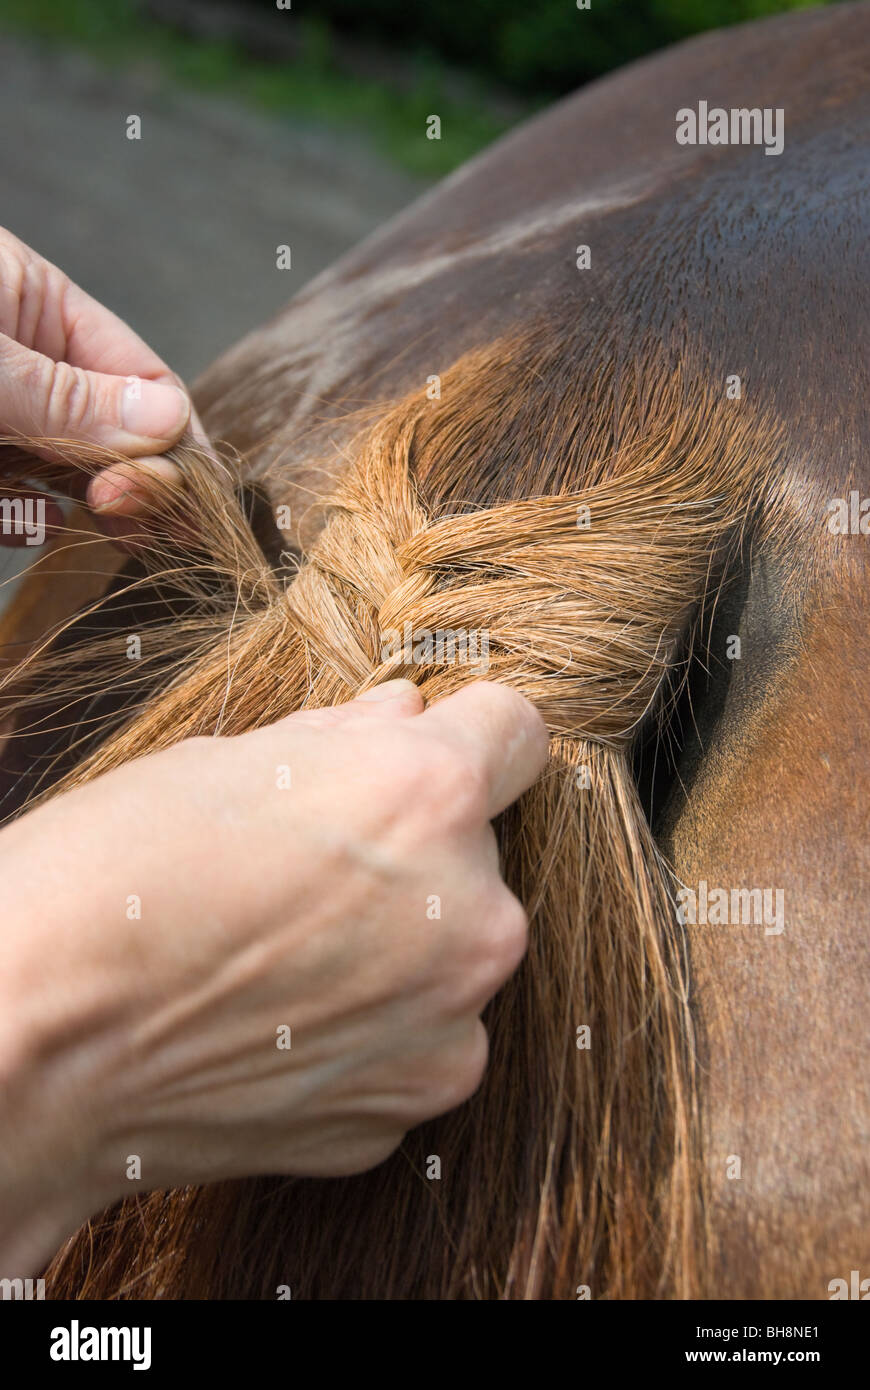 Picture of a horse tail being braided, focus on knot. Stock Photo